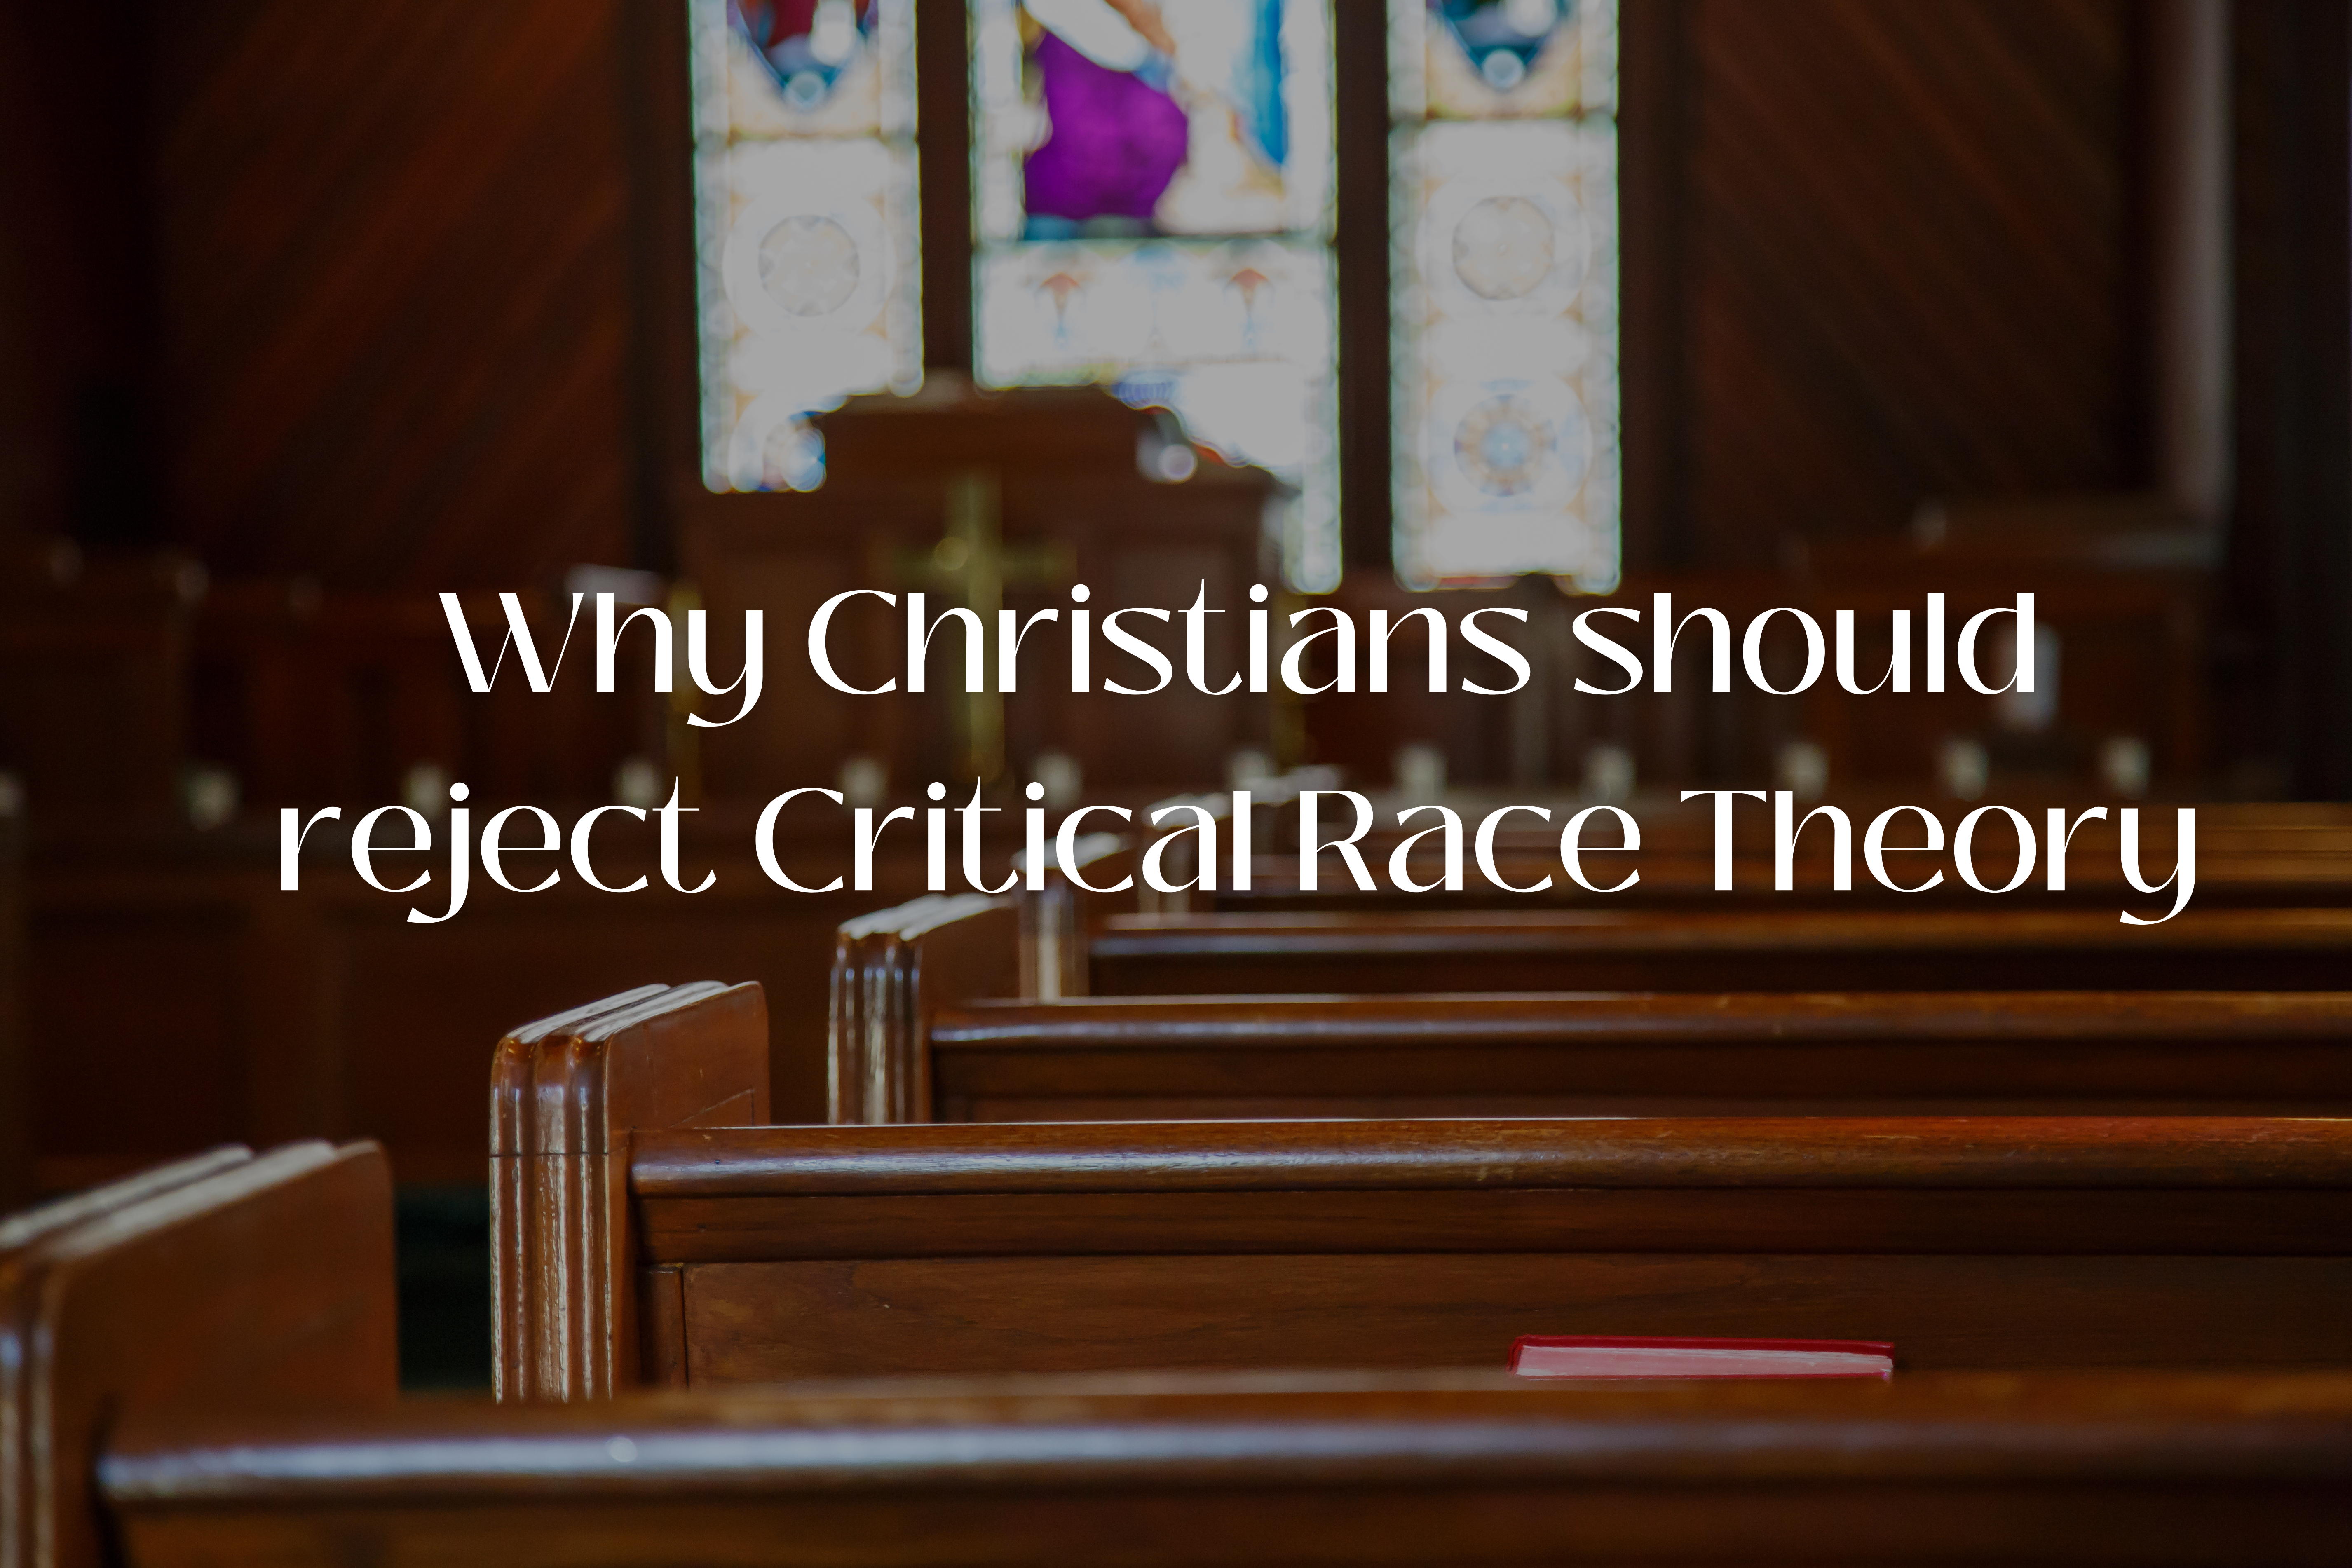 Why Christians should reject Critical Race Theory